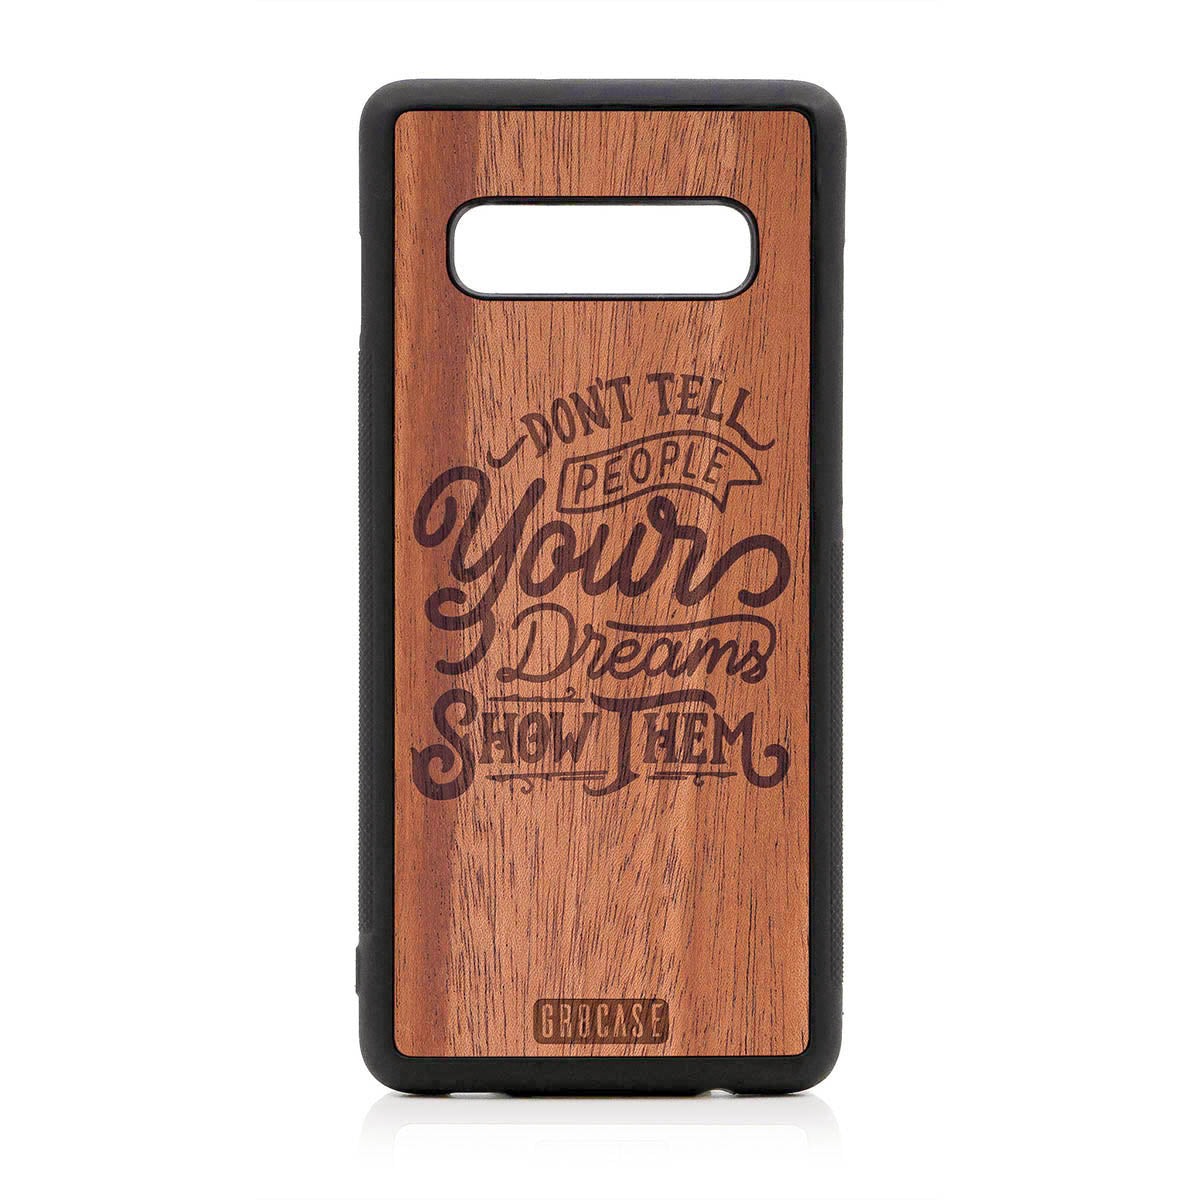 Don't Tell People Your Dreams Show Them Design Wood Case For Samsung Galaxy S10 Plus by GR8CASE